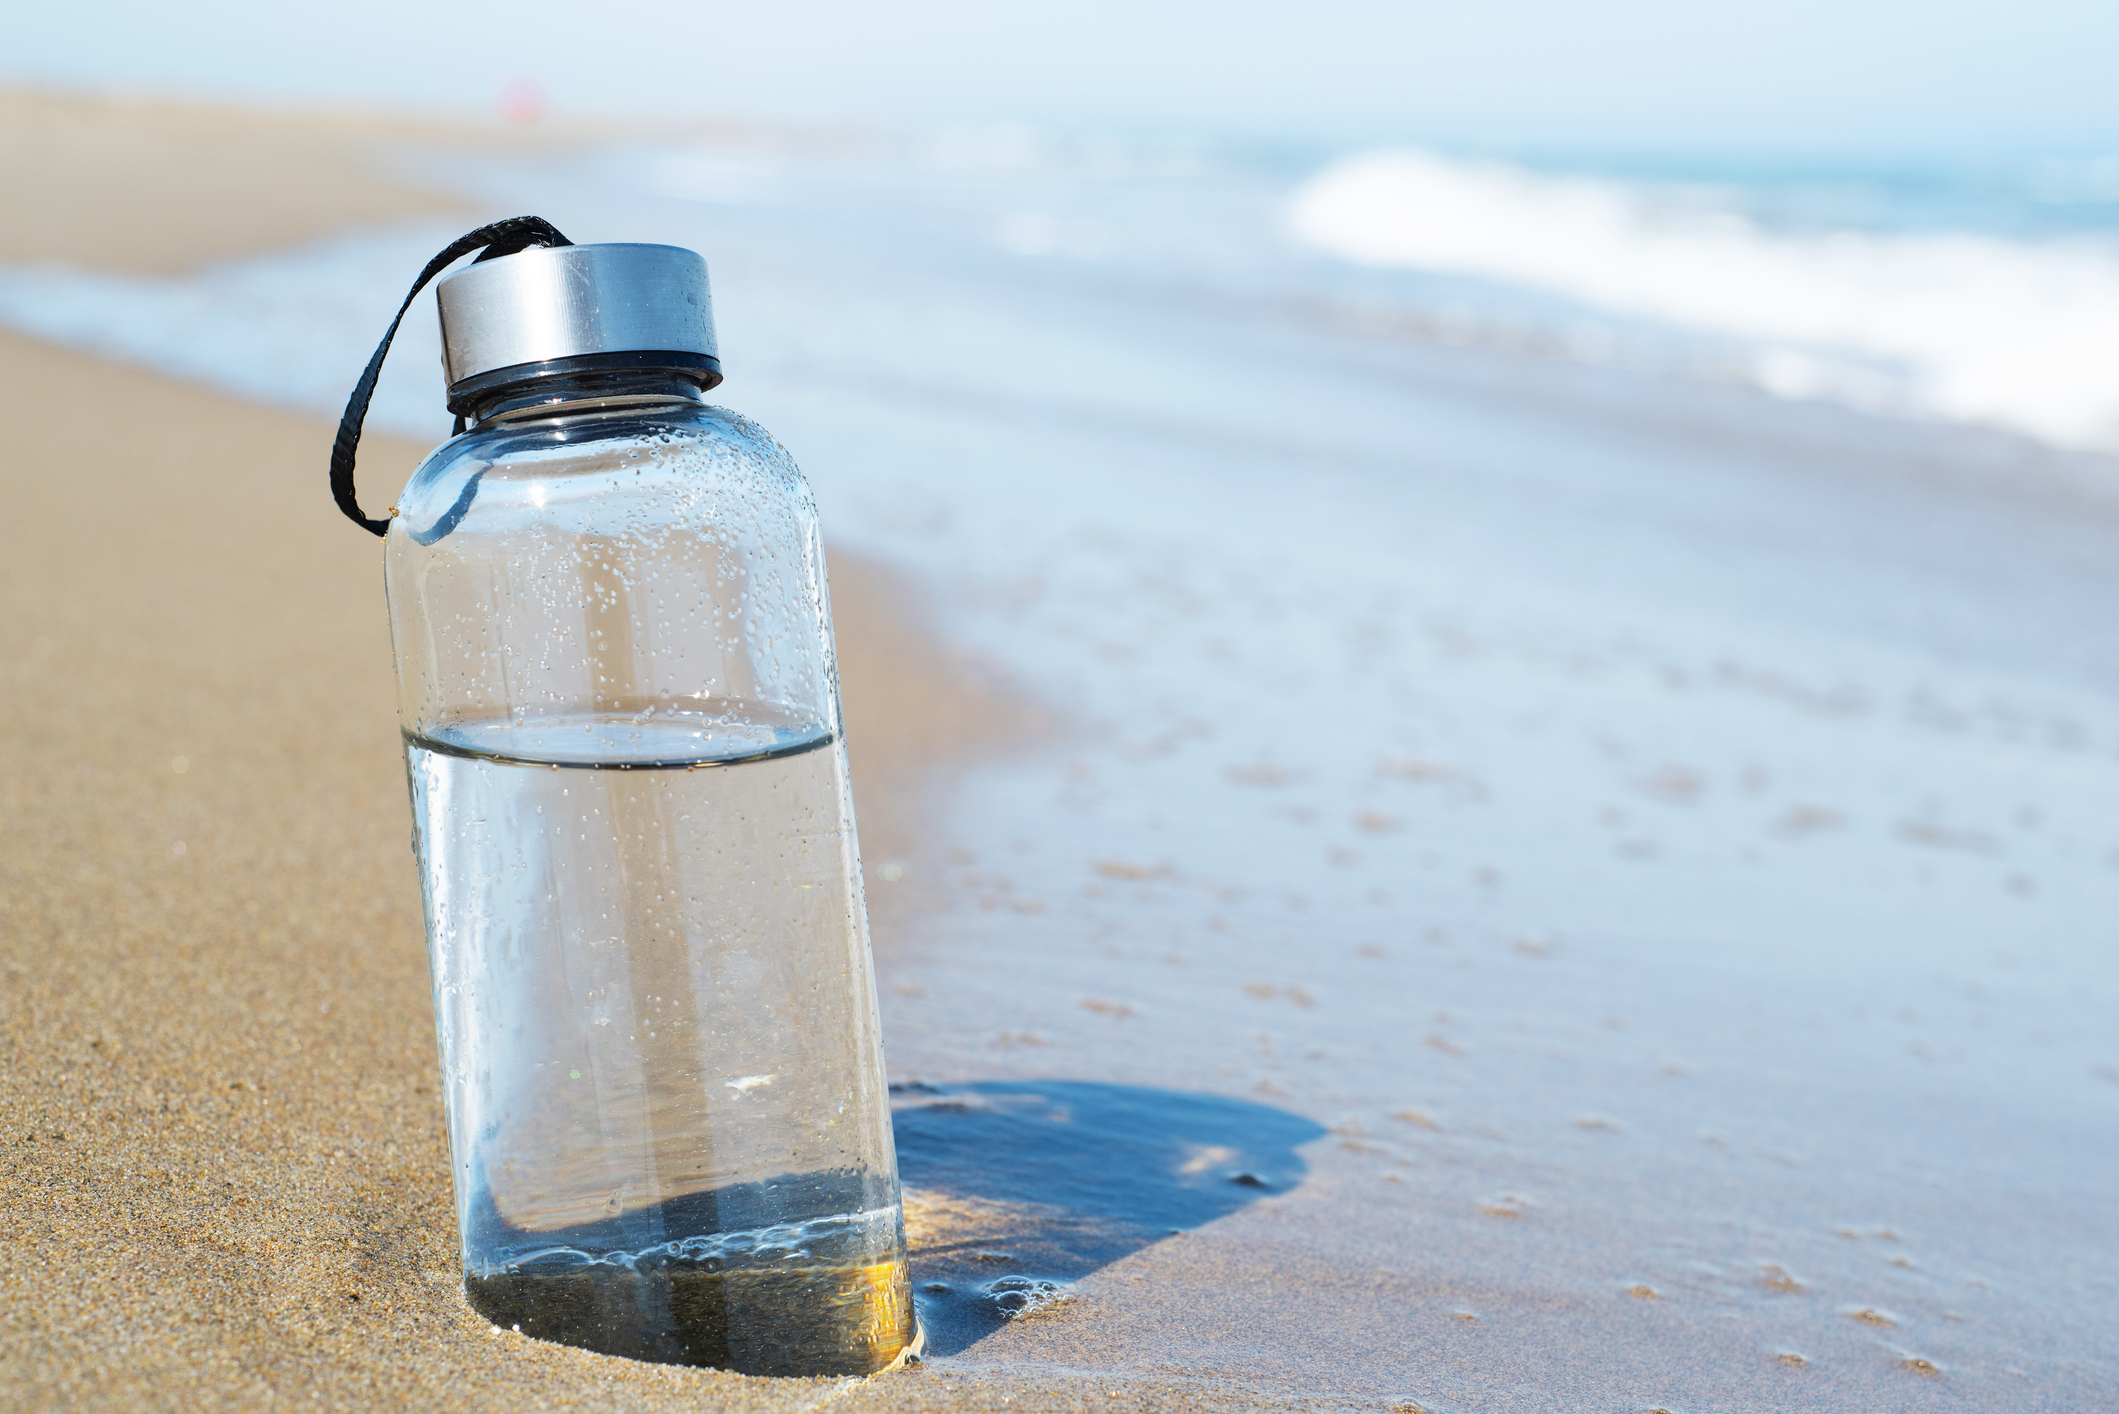 A glass reusable water bottle on a beach for Plastic Free July.